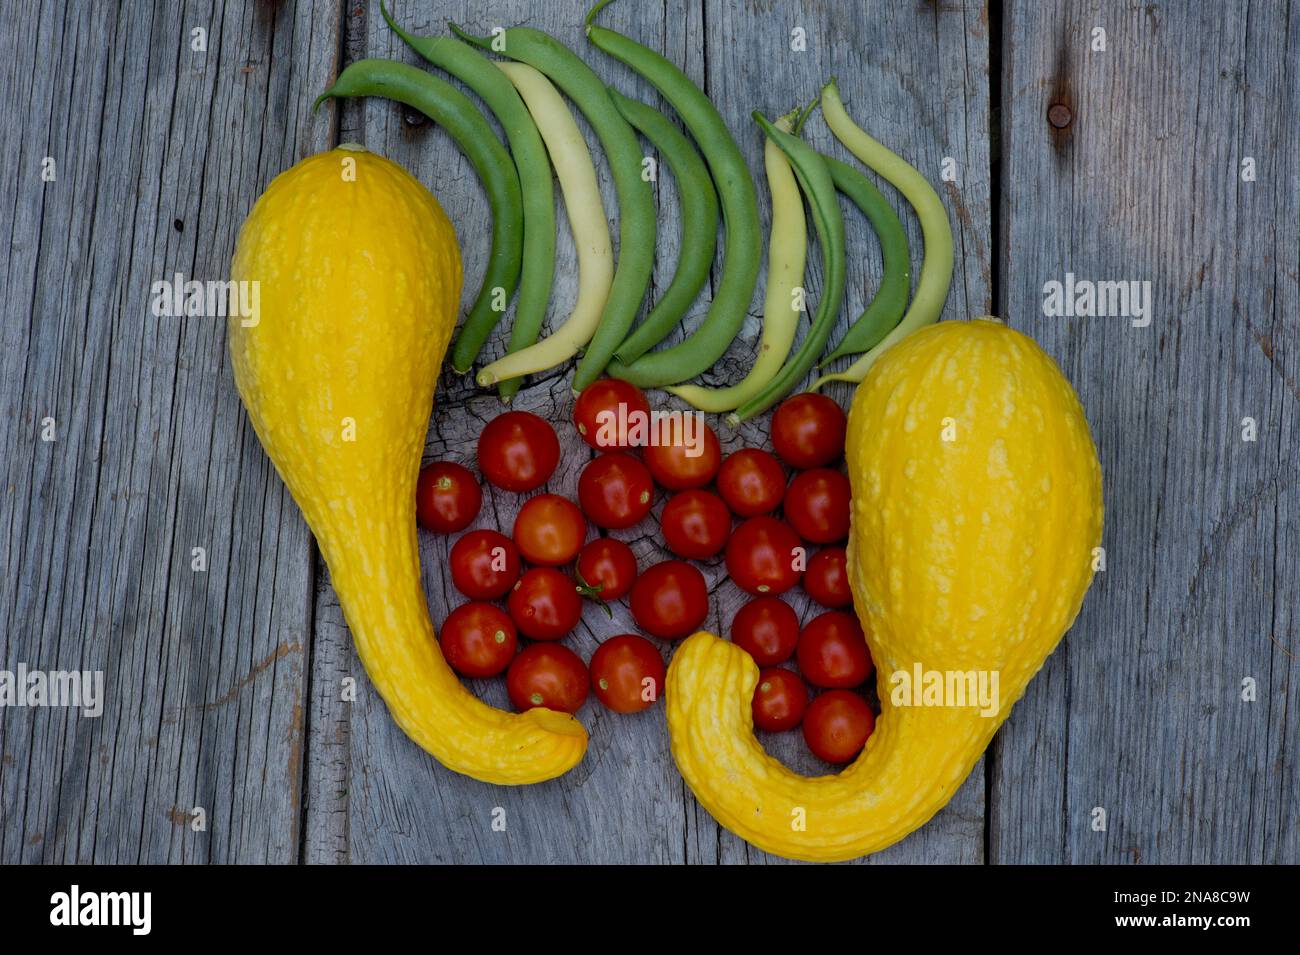 Summer vegetable garden harvest (summer crookneck squash, cherry tomatoes, and green beans). Stock Photo